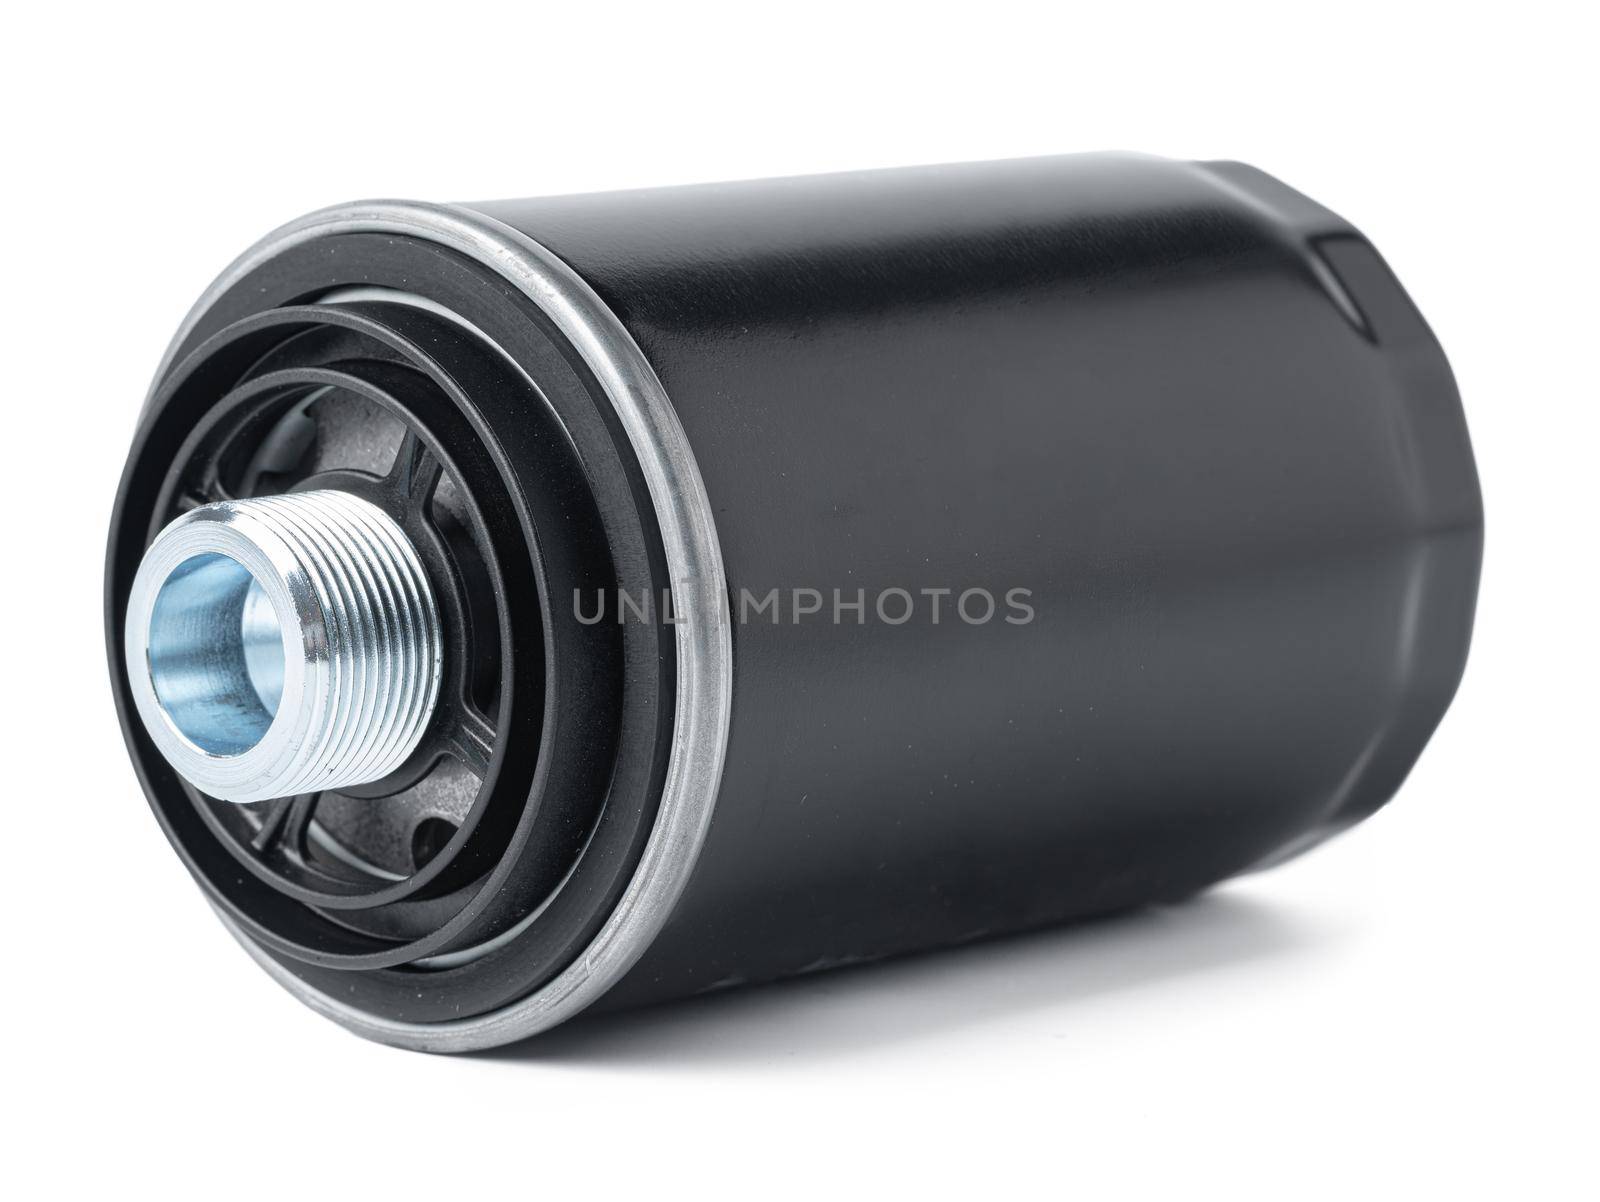 New oil filter car isolated on white background. by Fabrikasimf